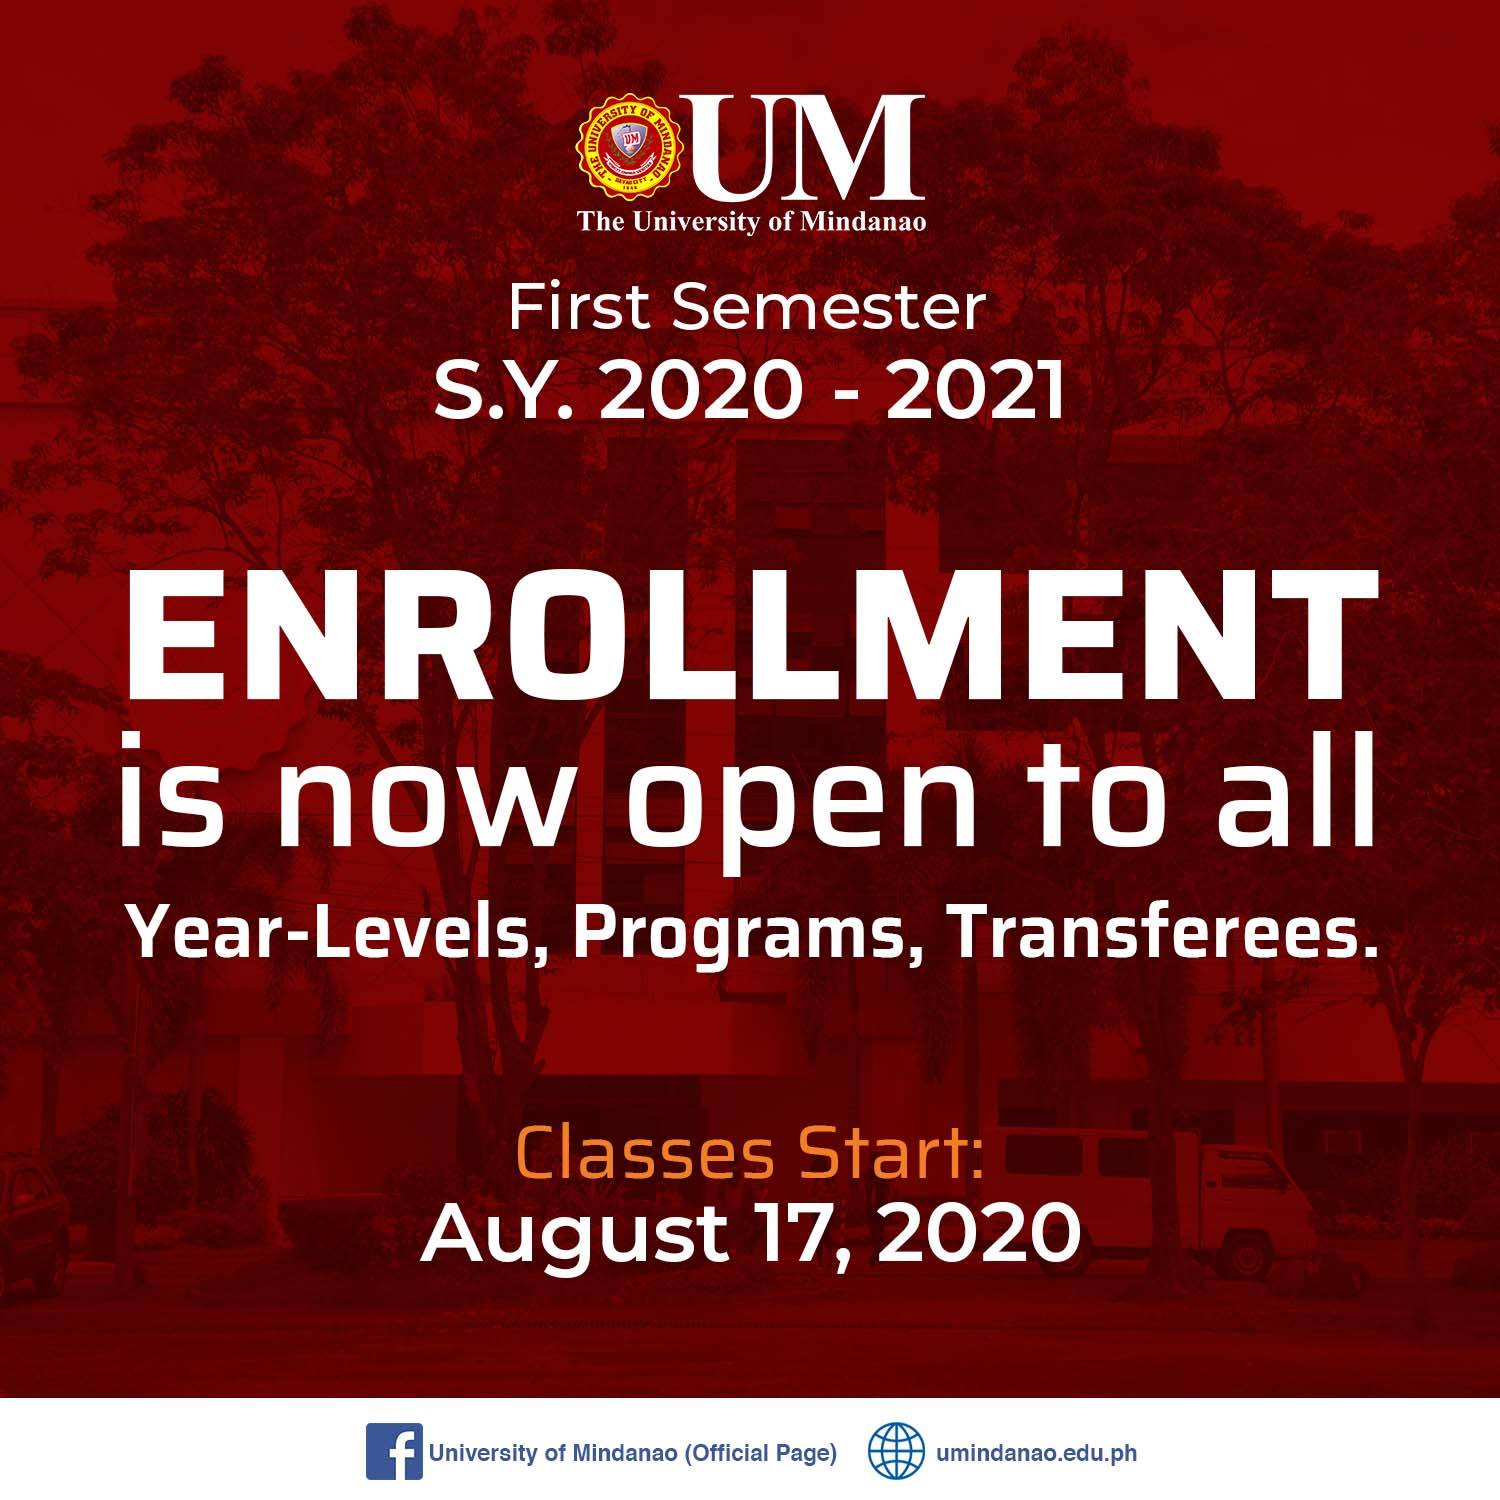 Enrollment is now open to all year levels, academic programs, and transferees